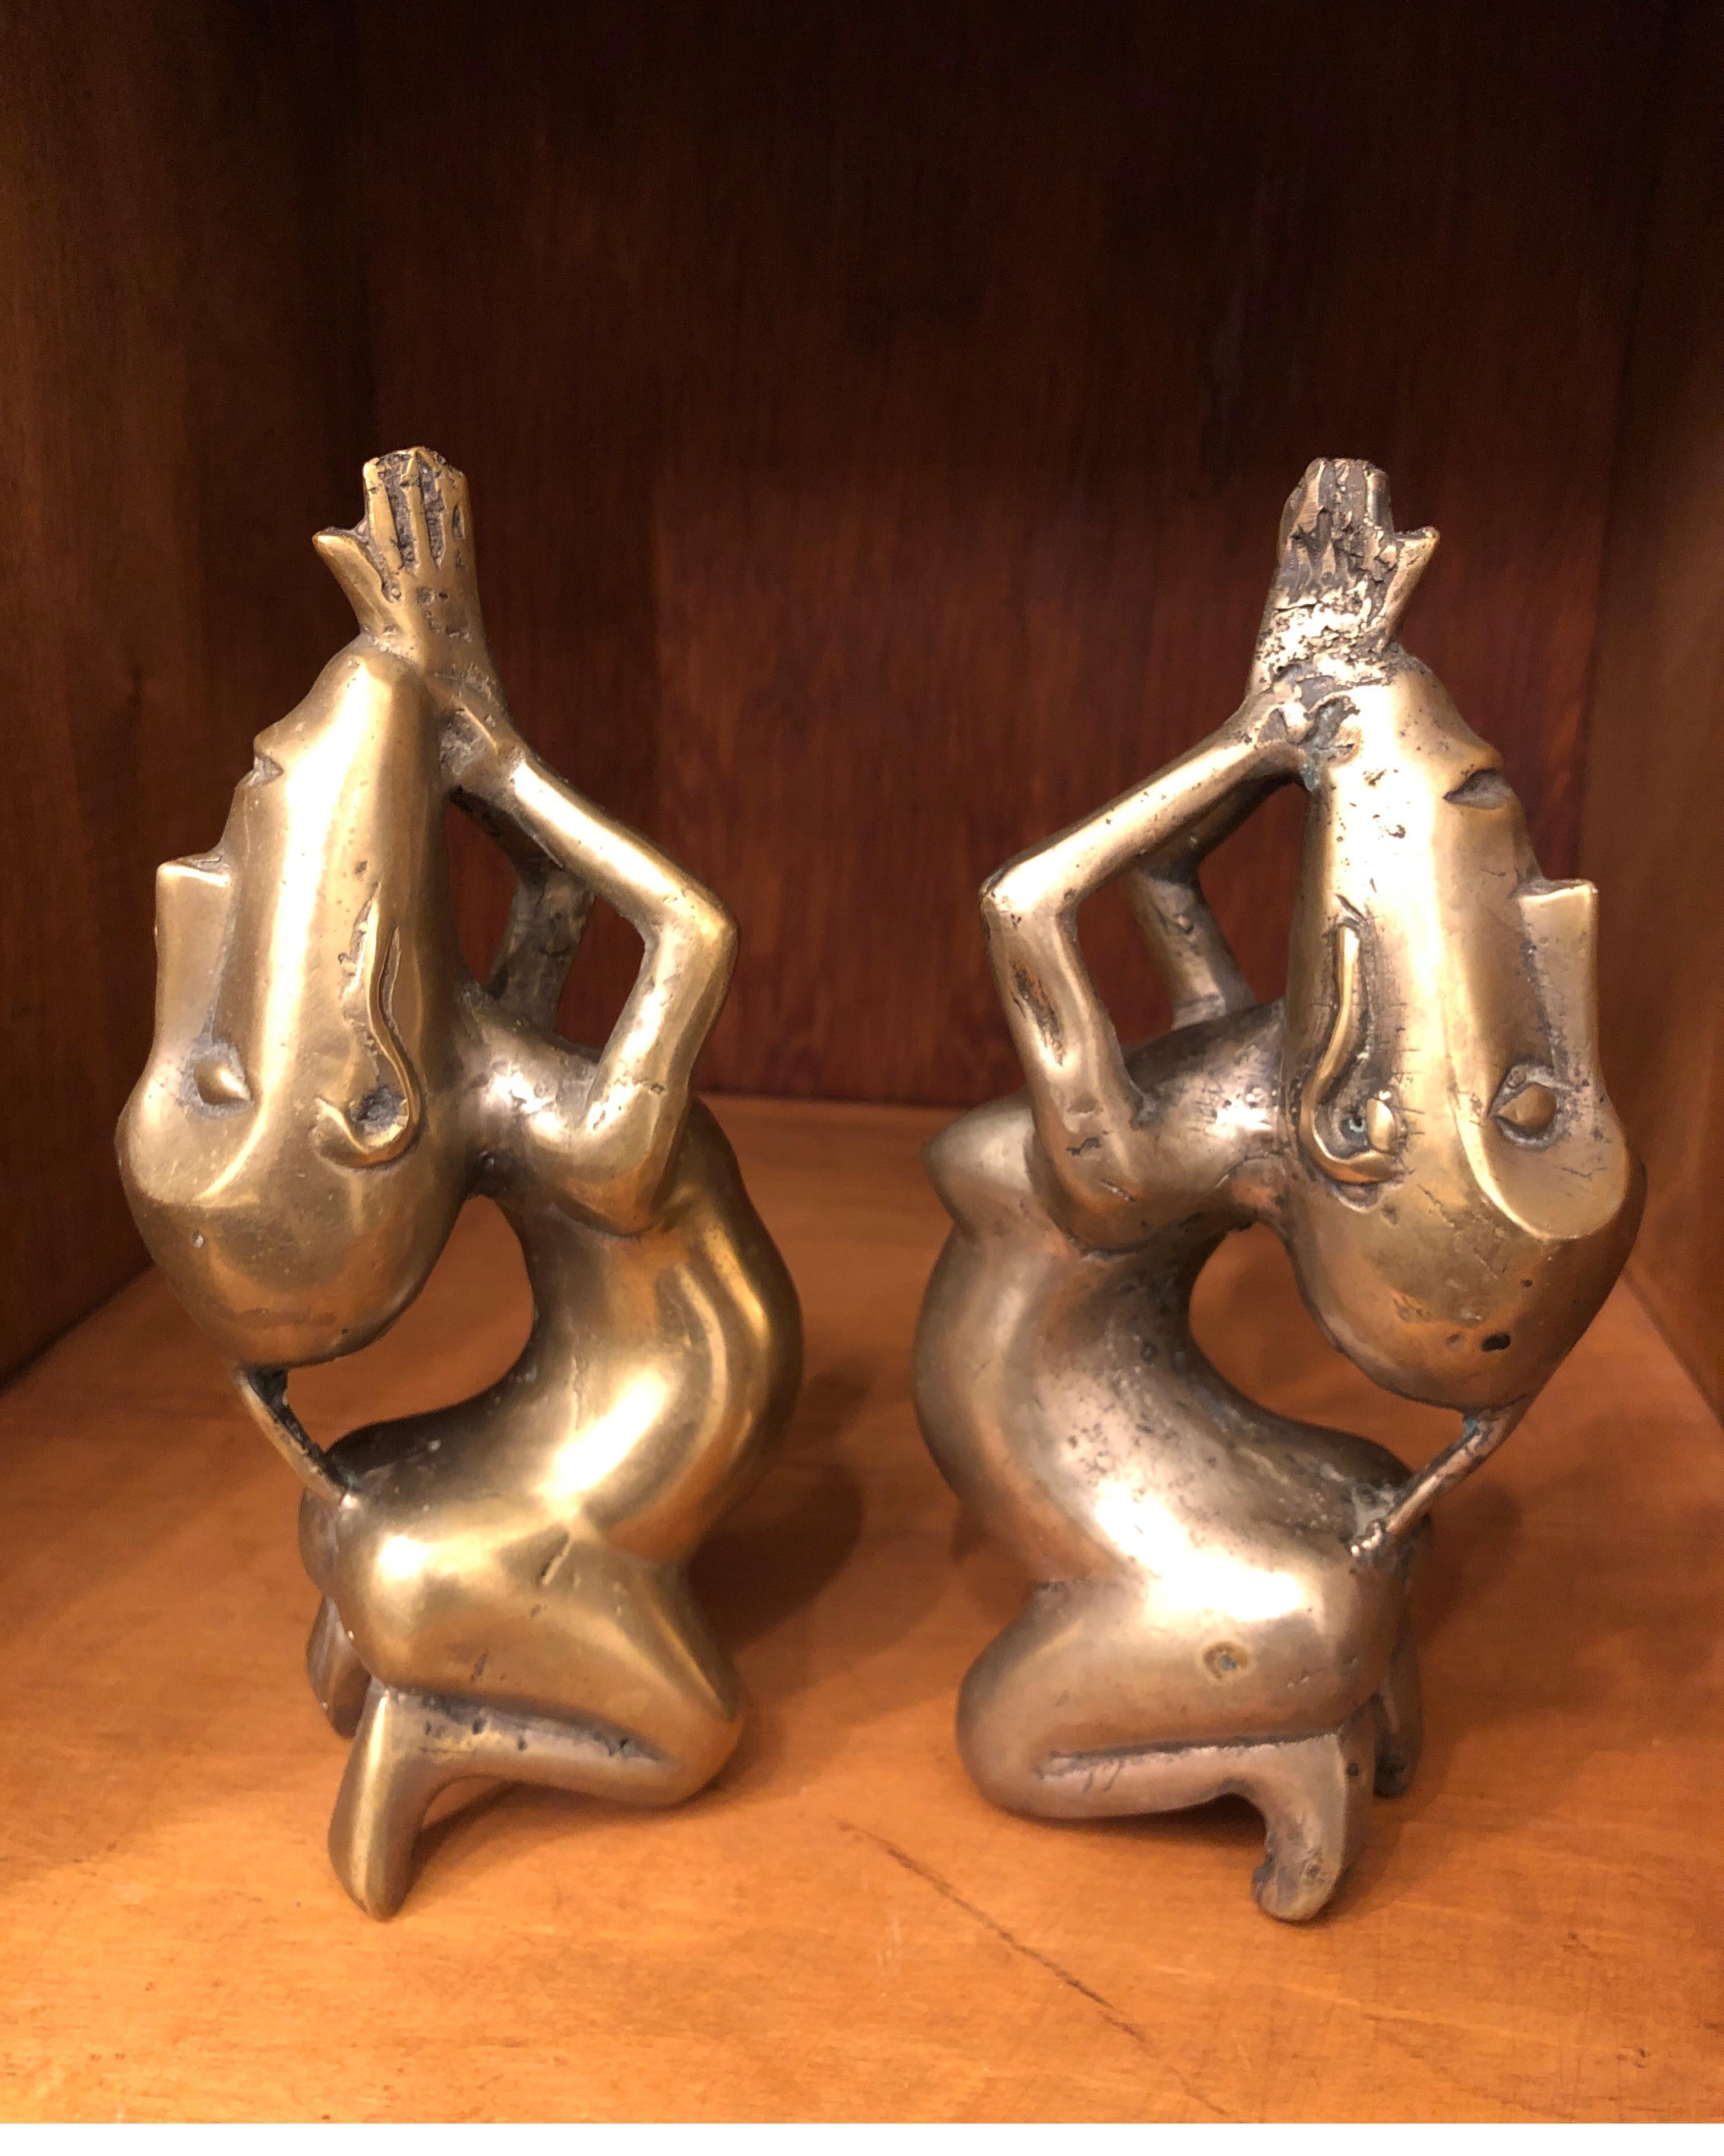 Unique pair of statues. Male and female made of solid brass. 
Elongated faces with hands clasped.

Natural patina.